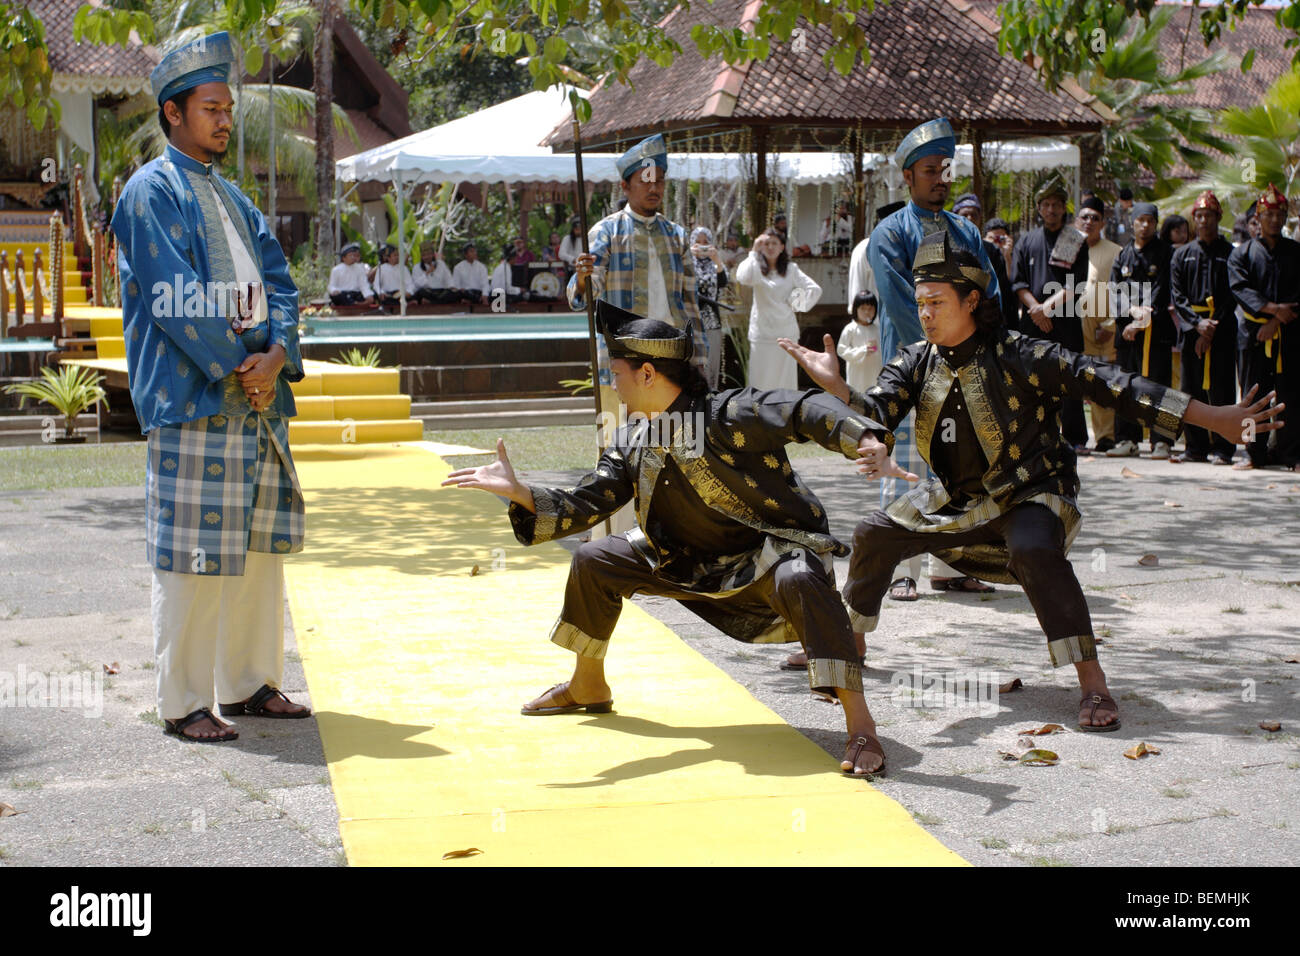 Demonstration on Silat, the Malay art of self defence in Terengganu, Malaysia. Stock Photo